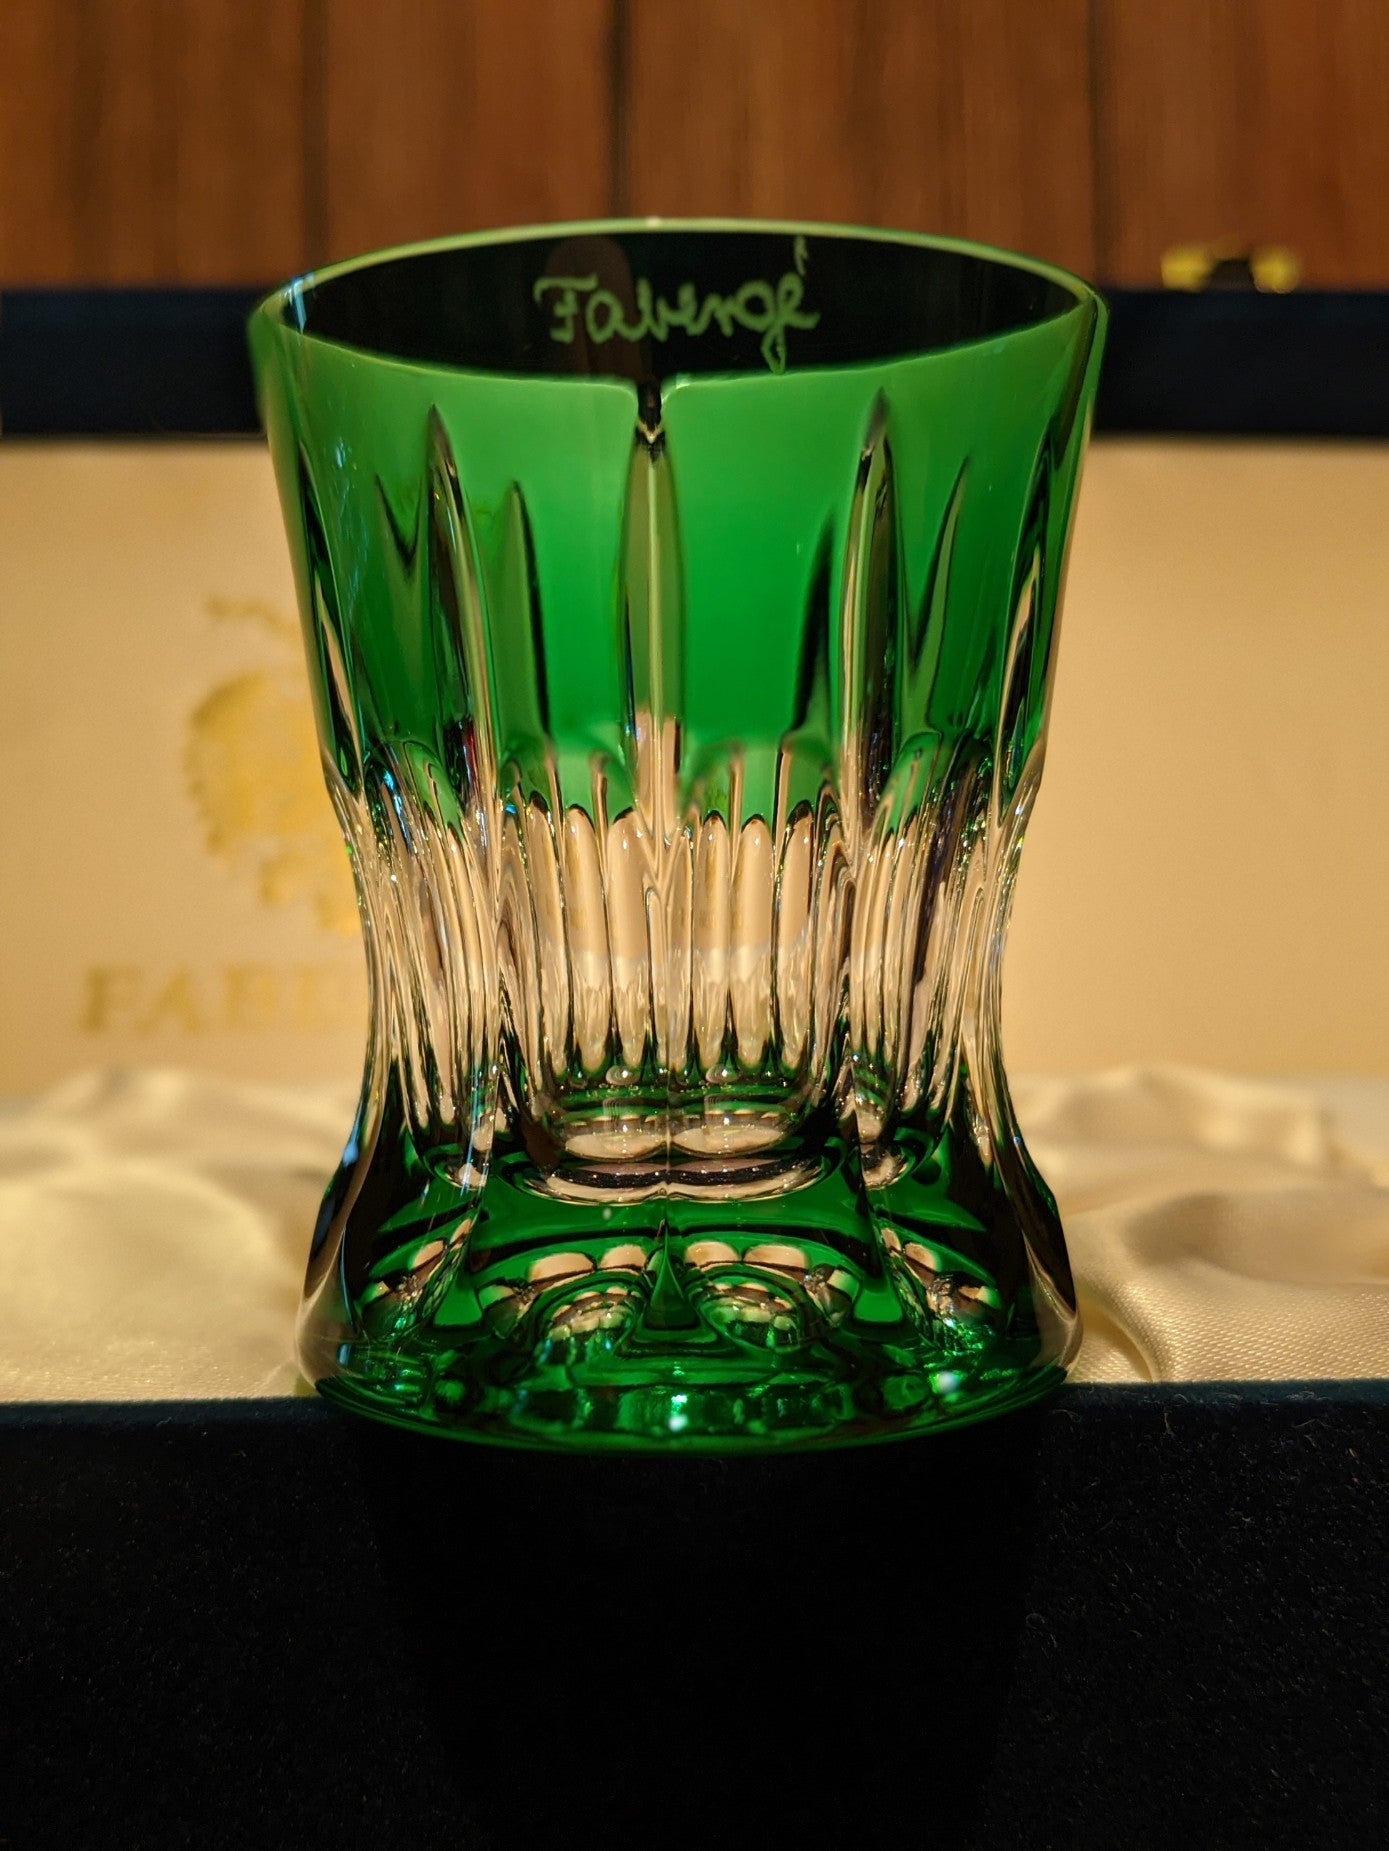 Faberge Odessa Crystal Colored Shot Glasses